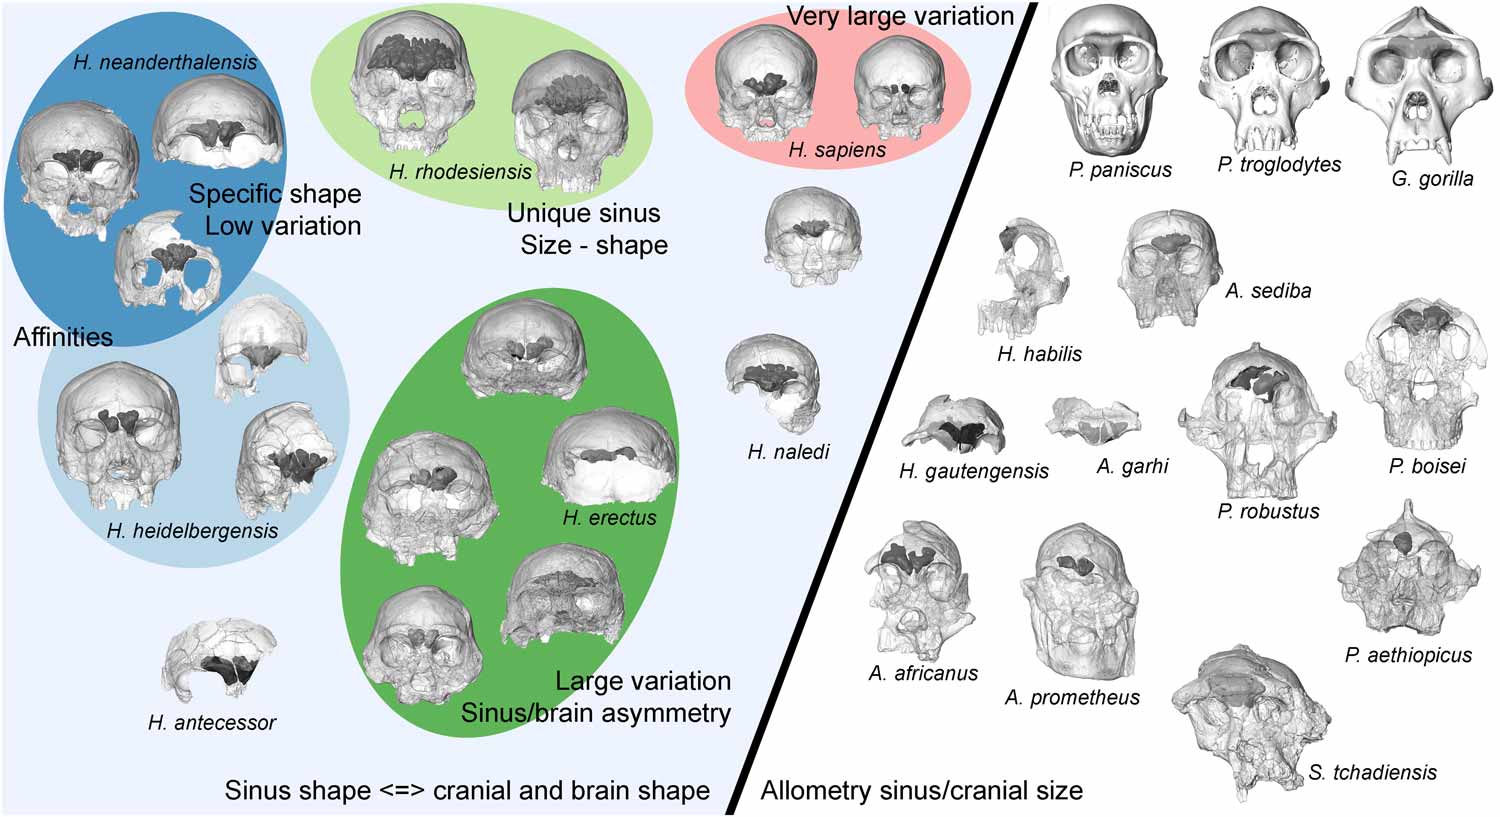 Skulls of hominins grouped by species with frontal sinuses shown. The main division separates most Homo skulls from Australopithecus and Paranthropus, which are grouped with living great apes.